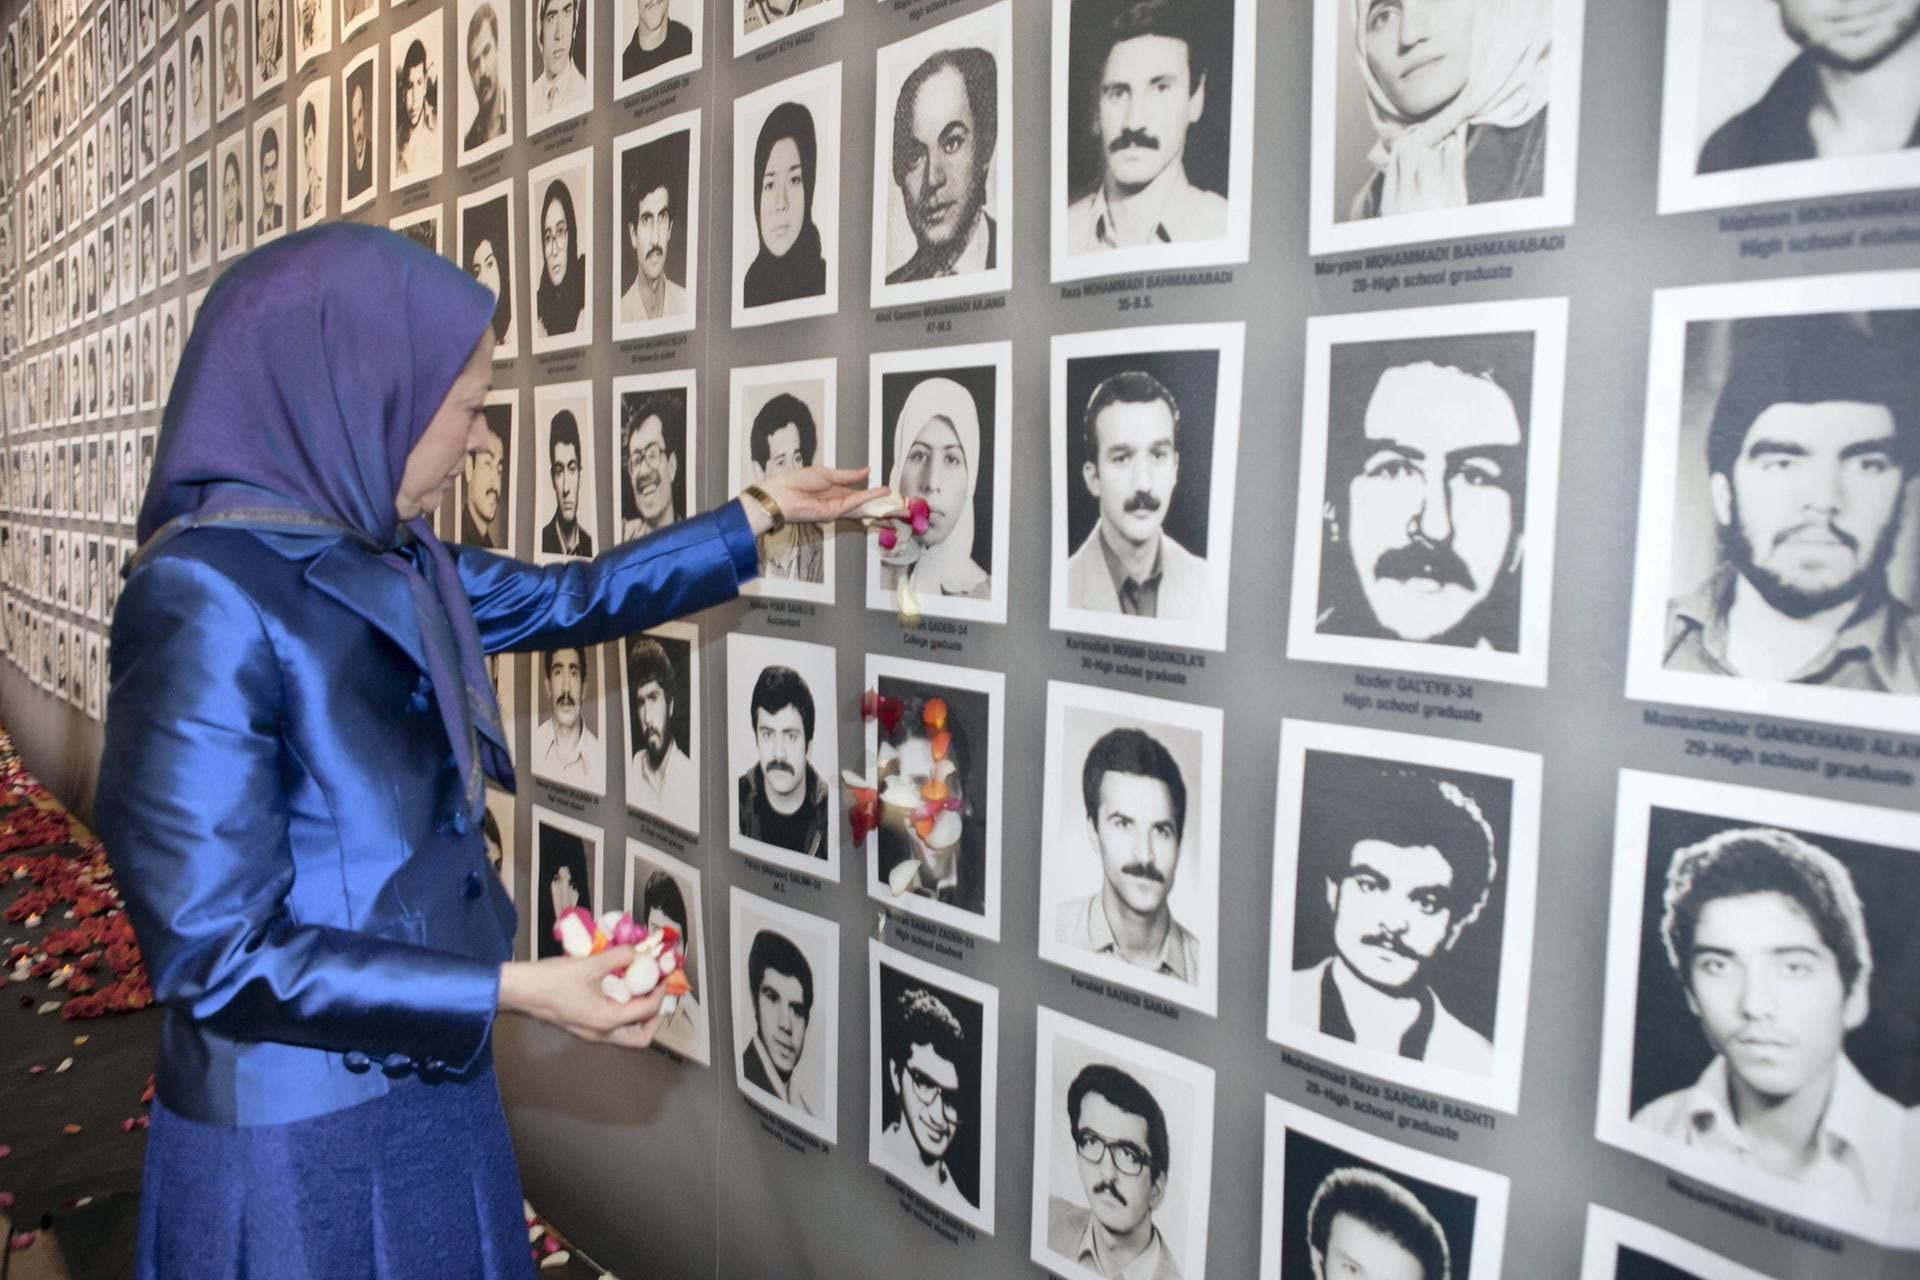 Those in the “death committee” at the time of the 1988 massacre are still  in power.